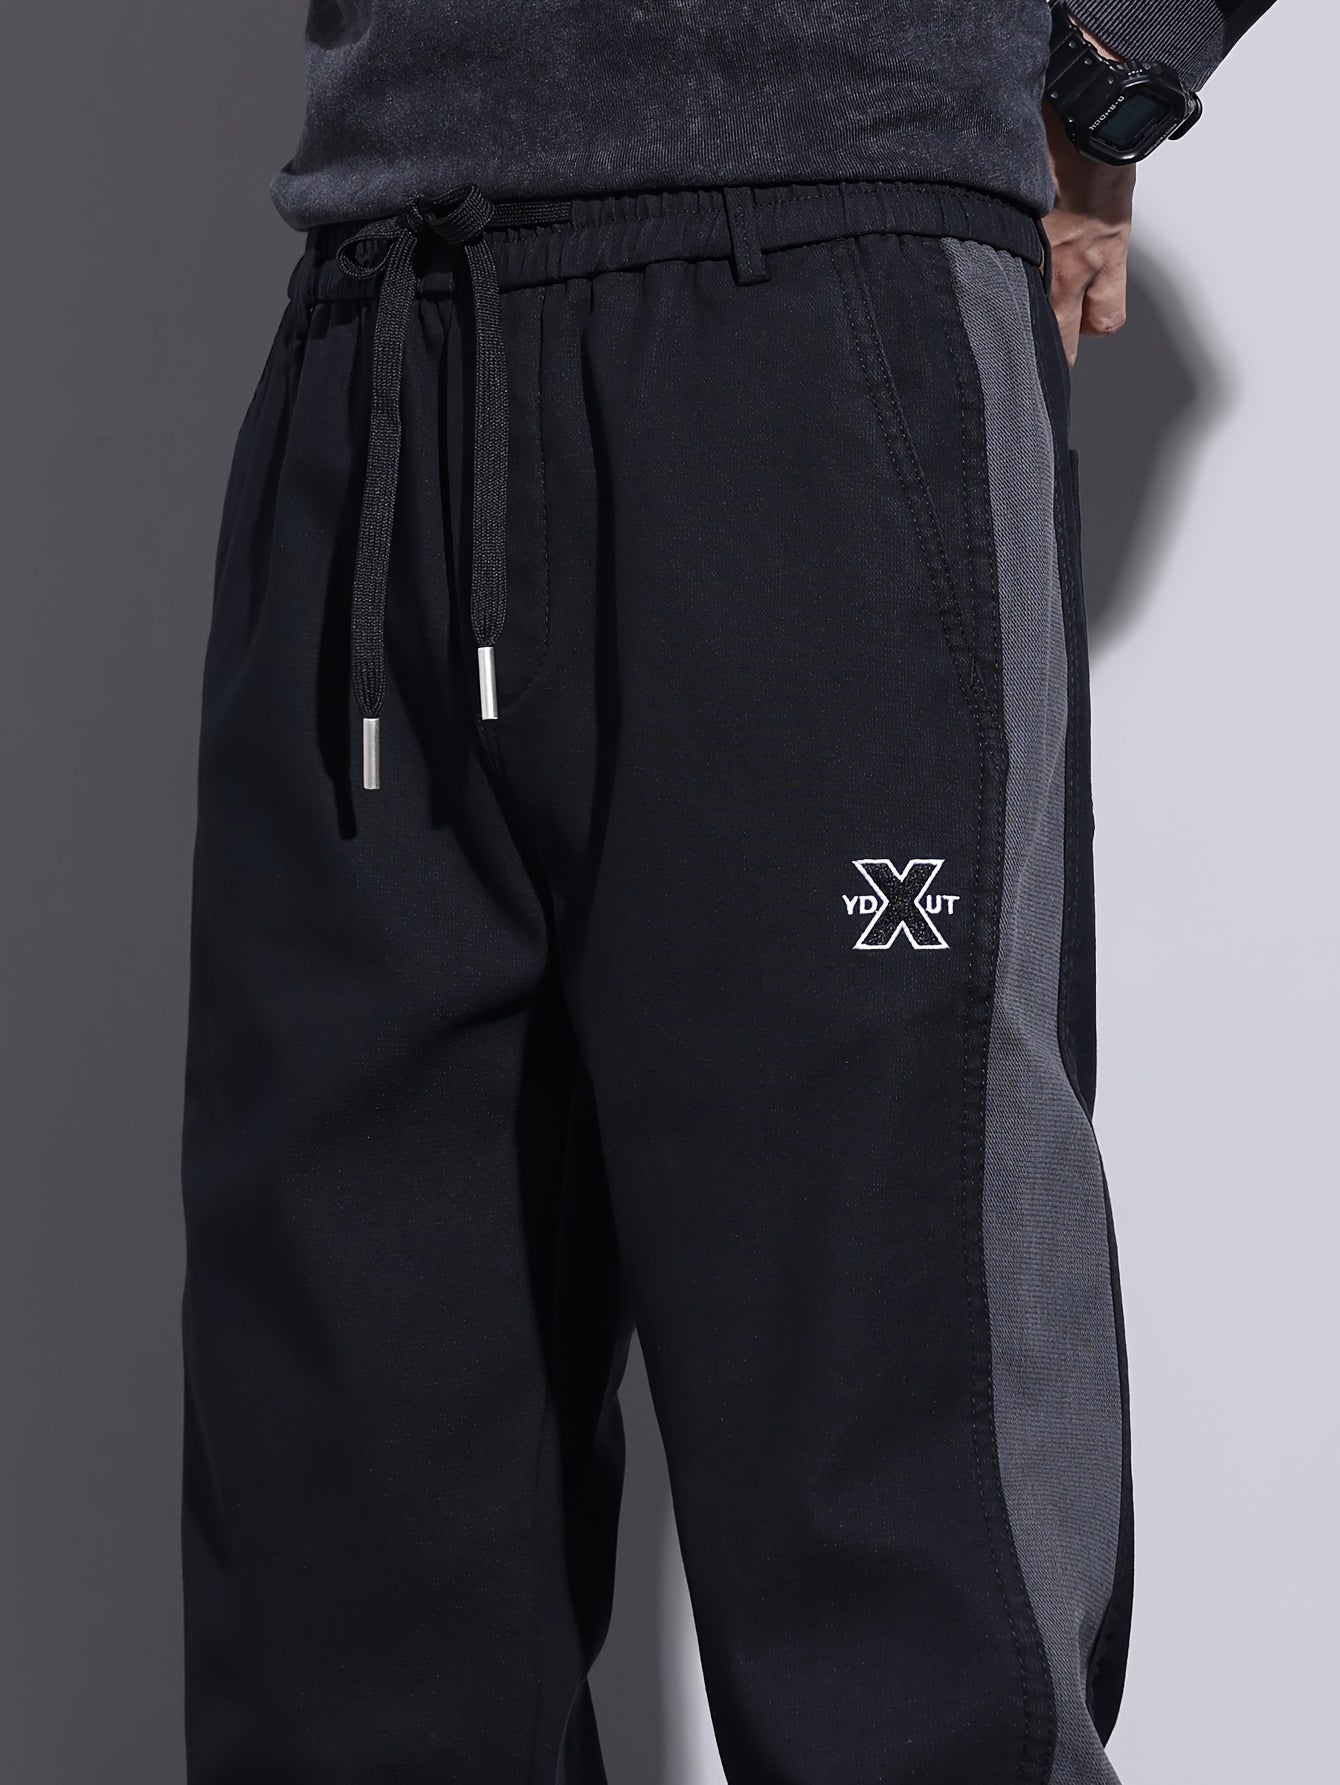 Embroidered Men's Joggers with Stretch Waistband - Casual Sport Pants